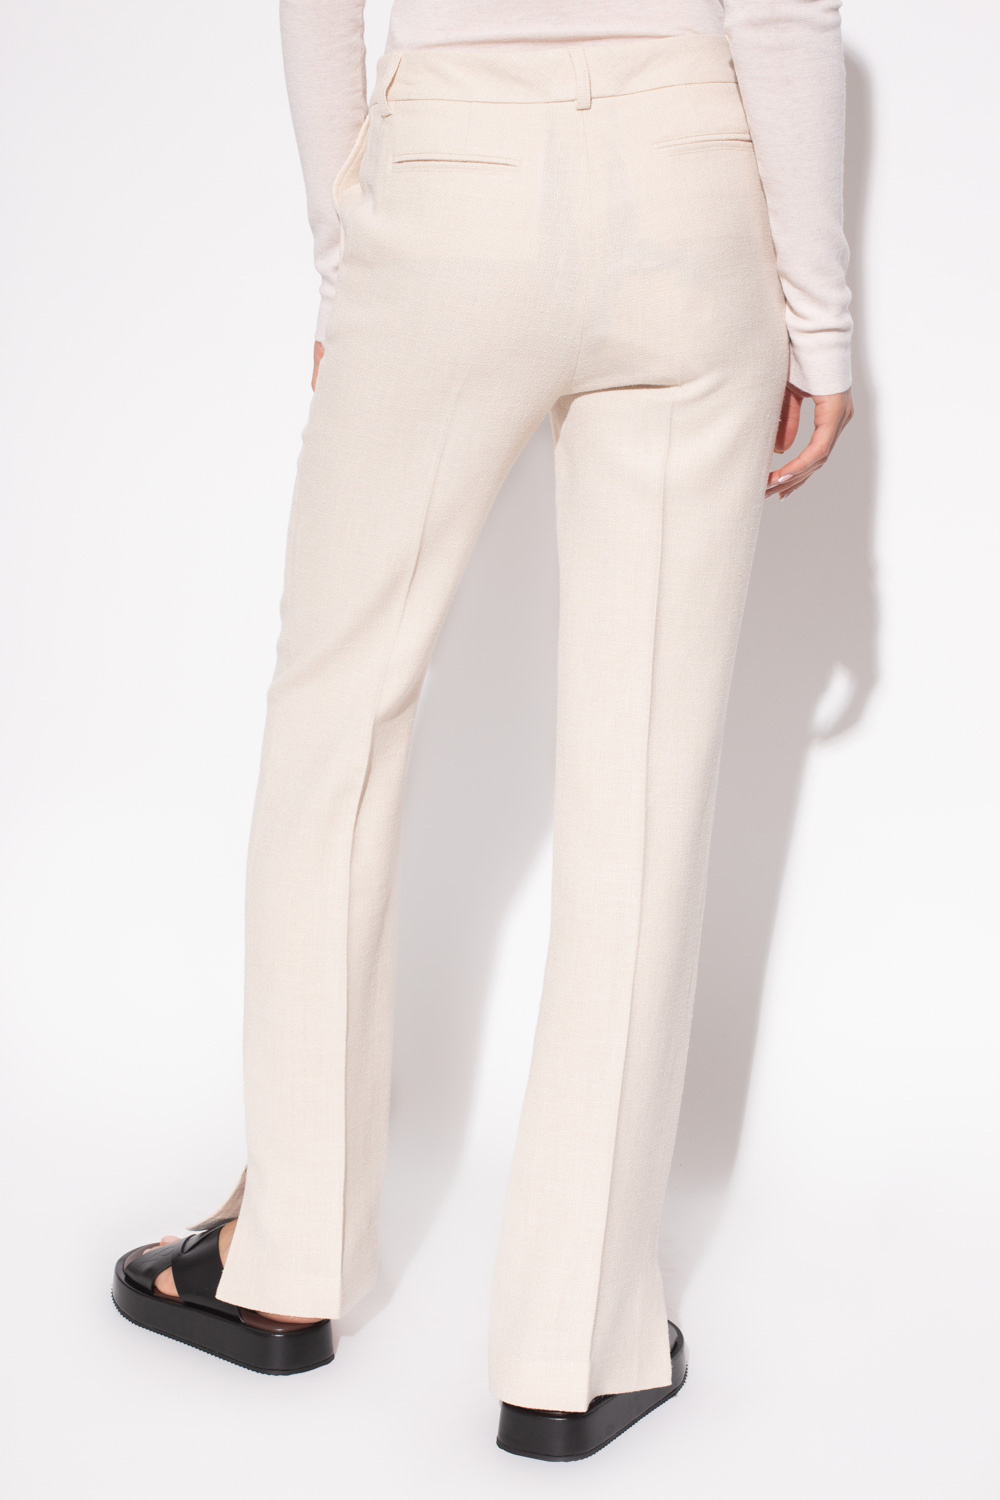 Etro Pleat-front Pack trousers